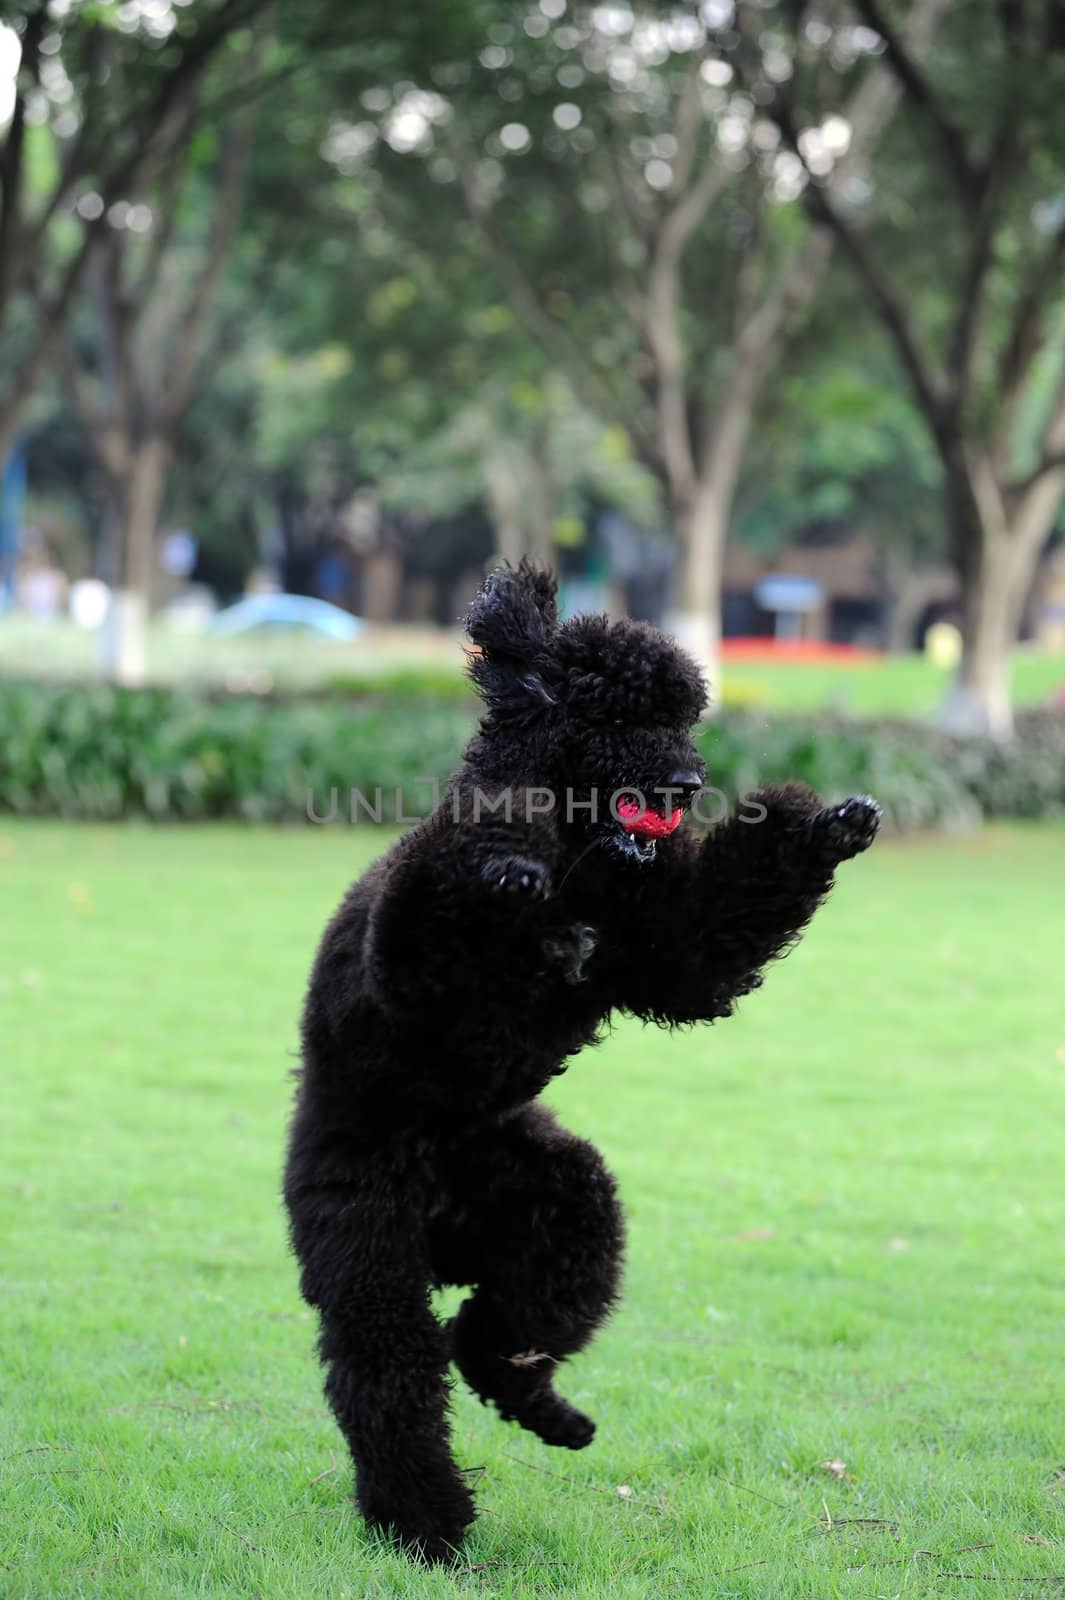 Black poodle dog holding a ball in the mouth and standing on hind legs